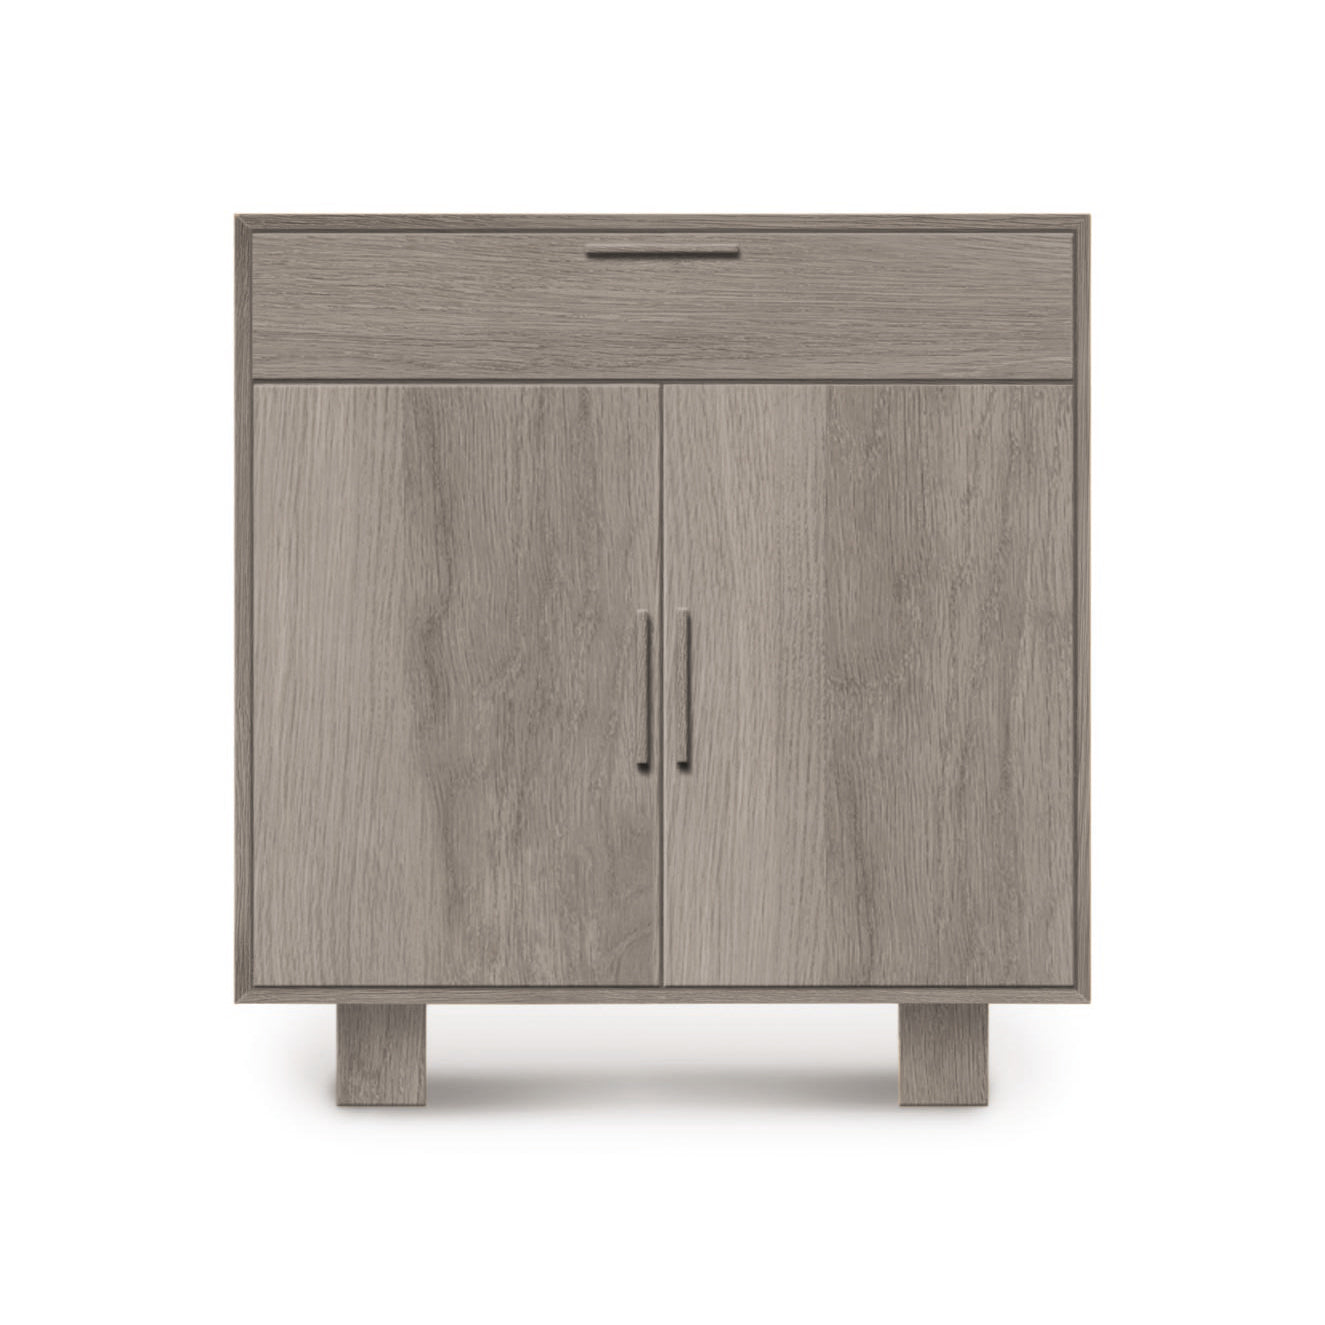 A minimalist mid-century modern style Iso 2 Door, 1 Drawer Buffet cabinet by Copeland Furniture on a white background.